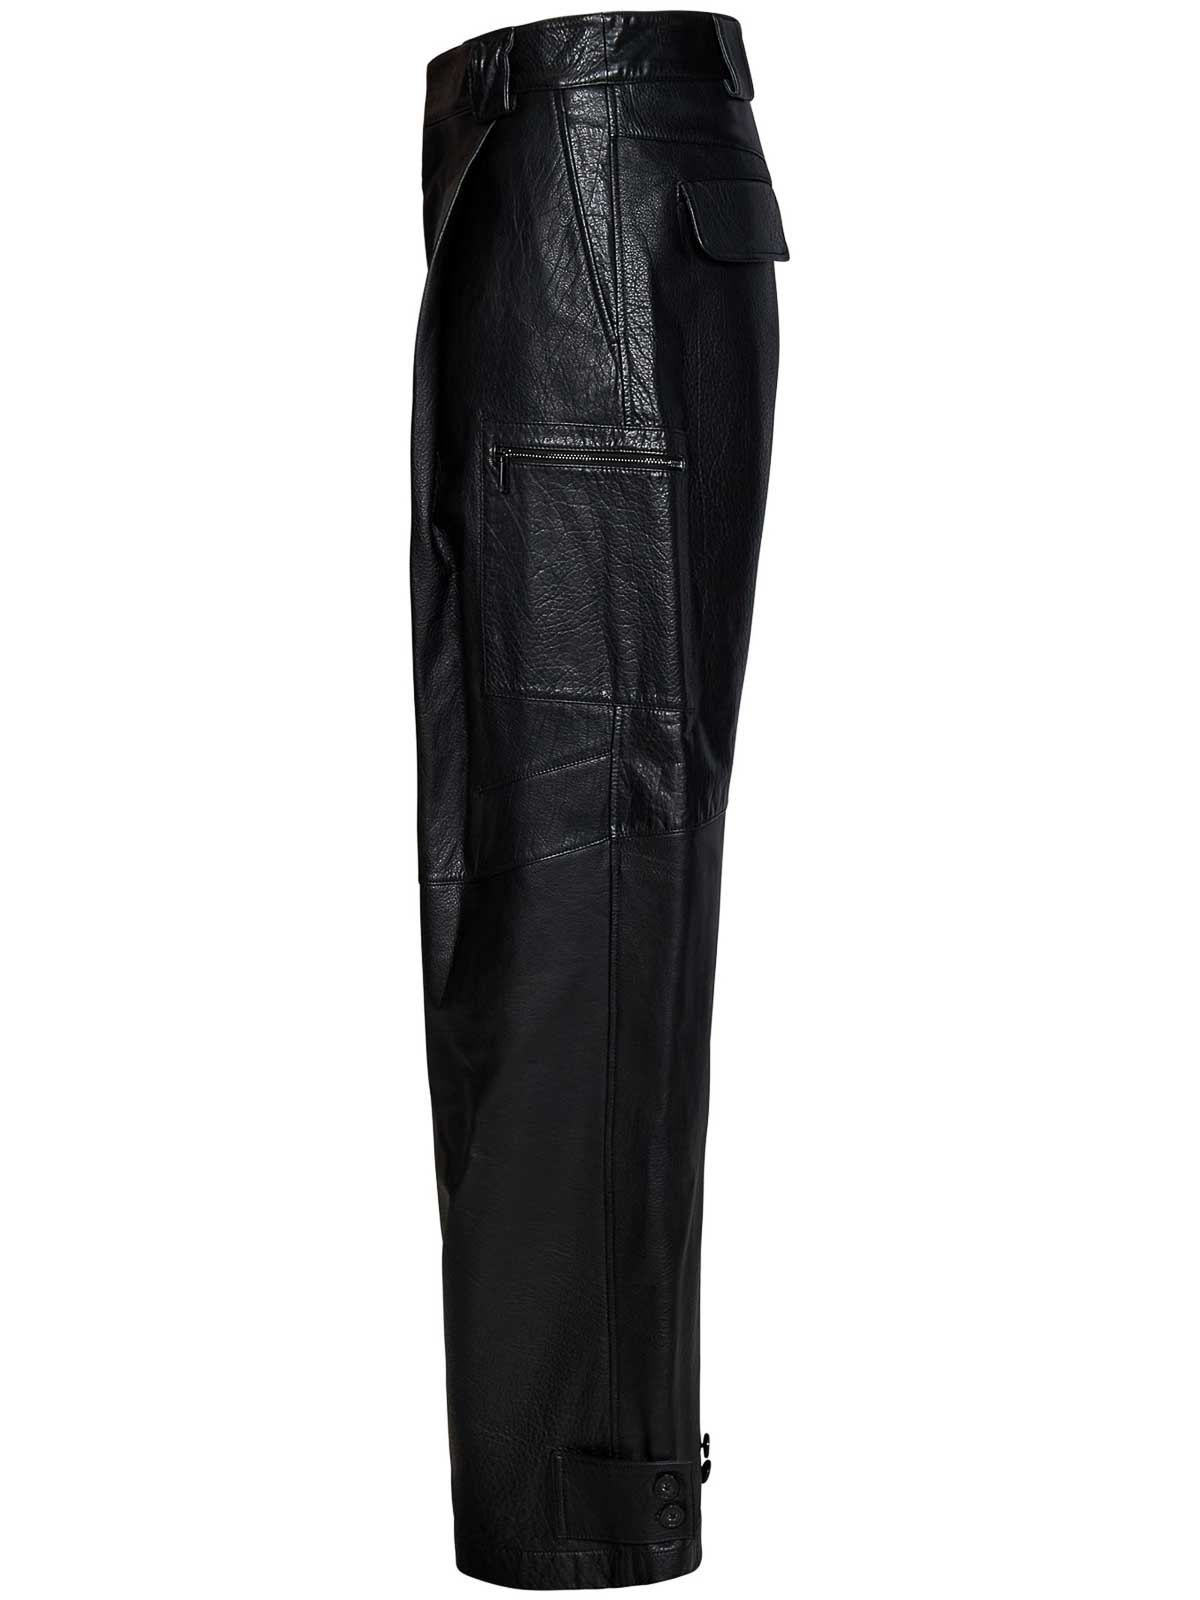 Emporio Armani Official Store Cargo Trousers In Vegetable-tanned Water  Buffalo Nappa Leather With An Adjustable Hem In Black | ModeSens